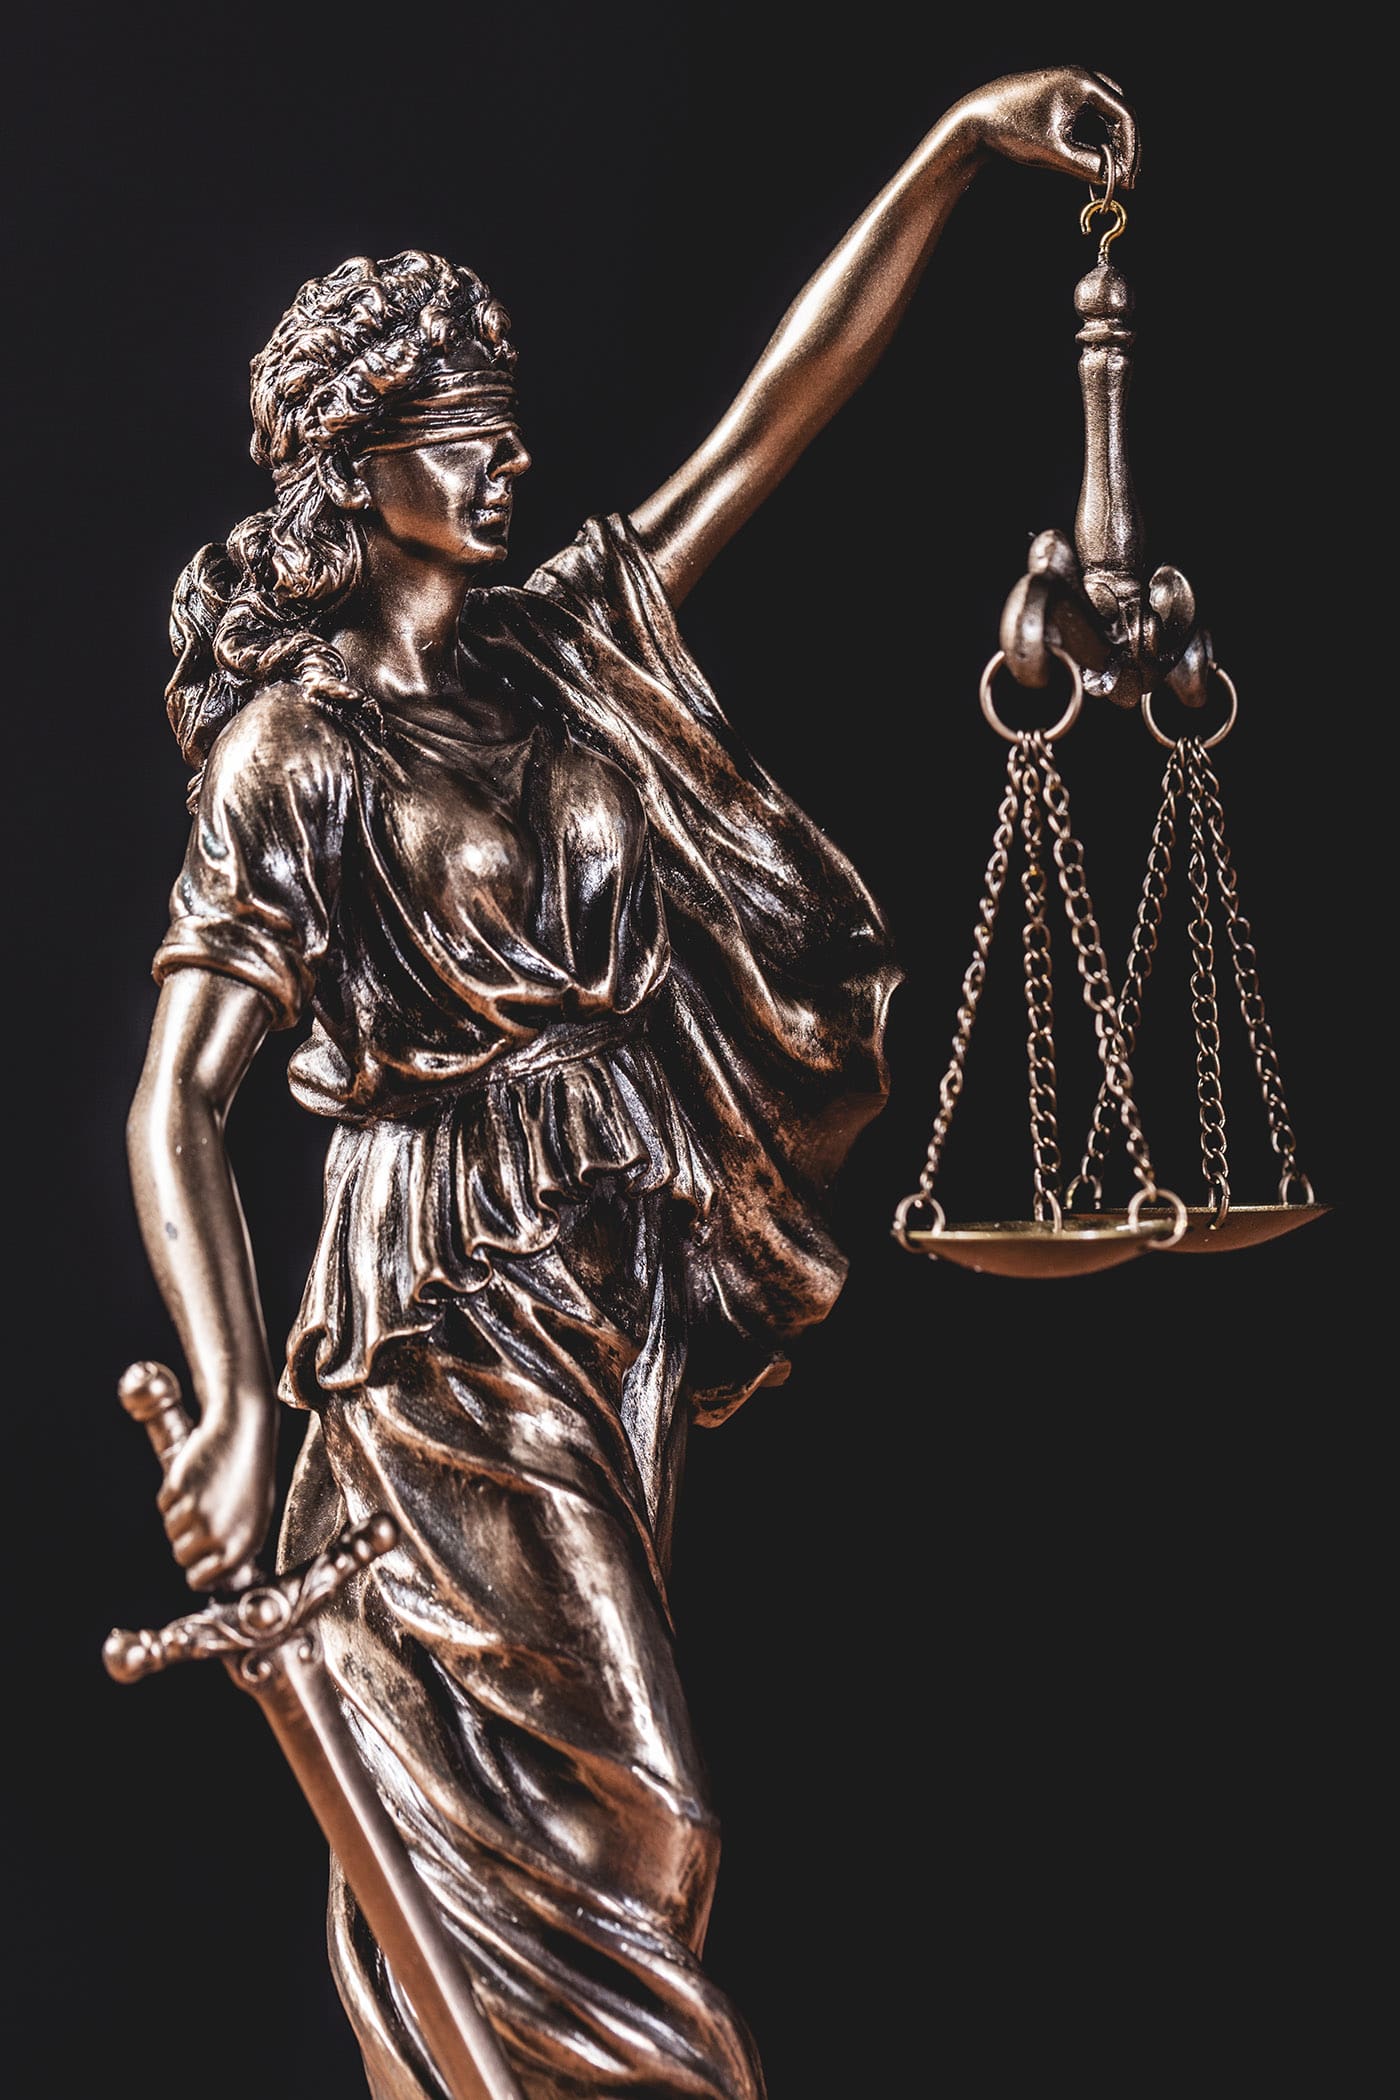 Justice, balance, law, court, legal, rights